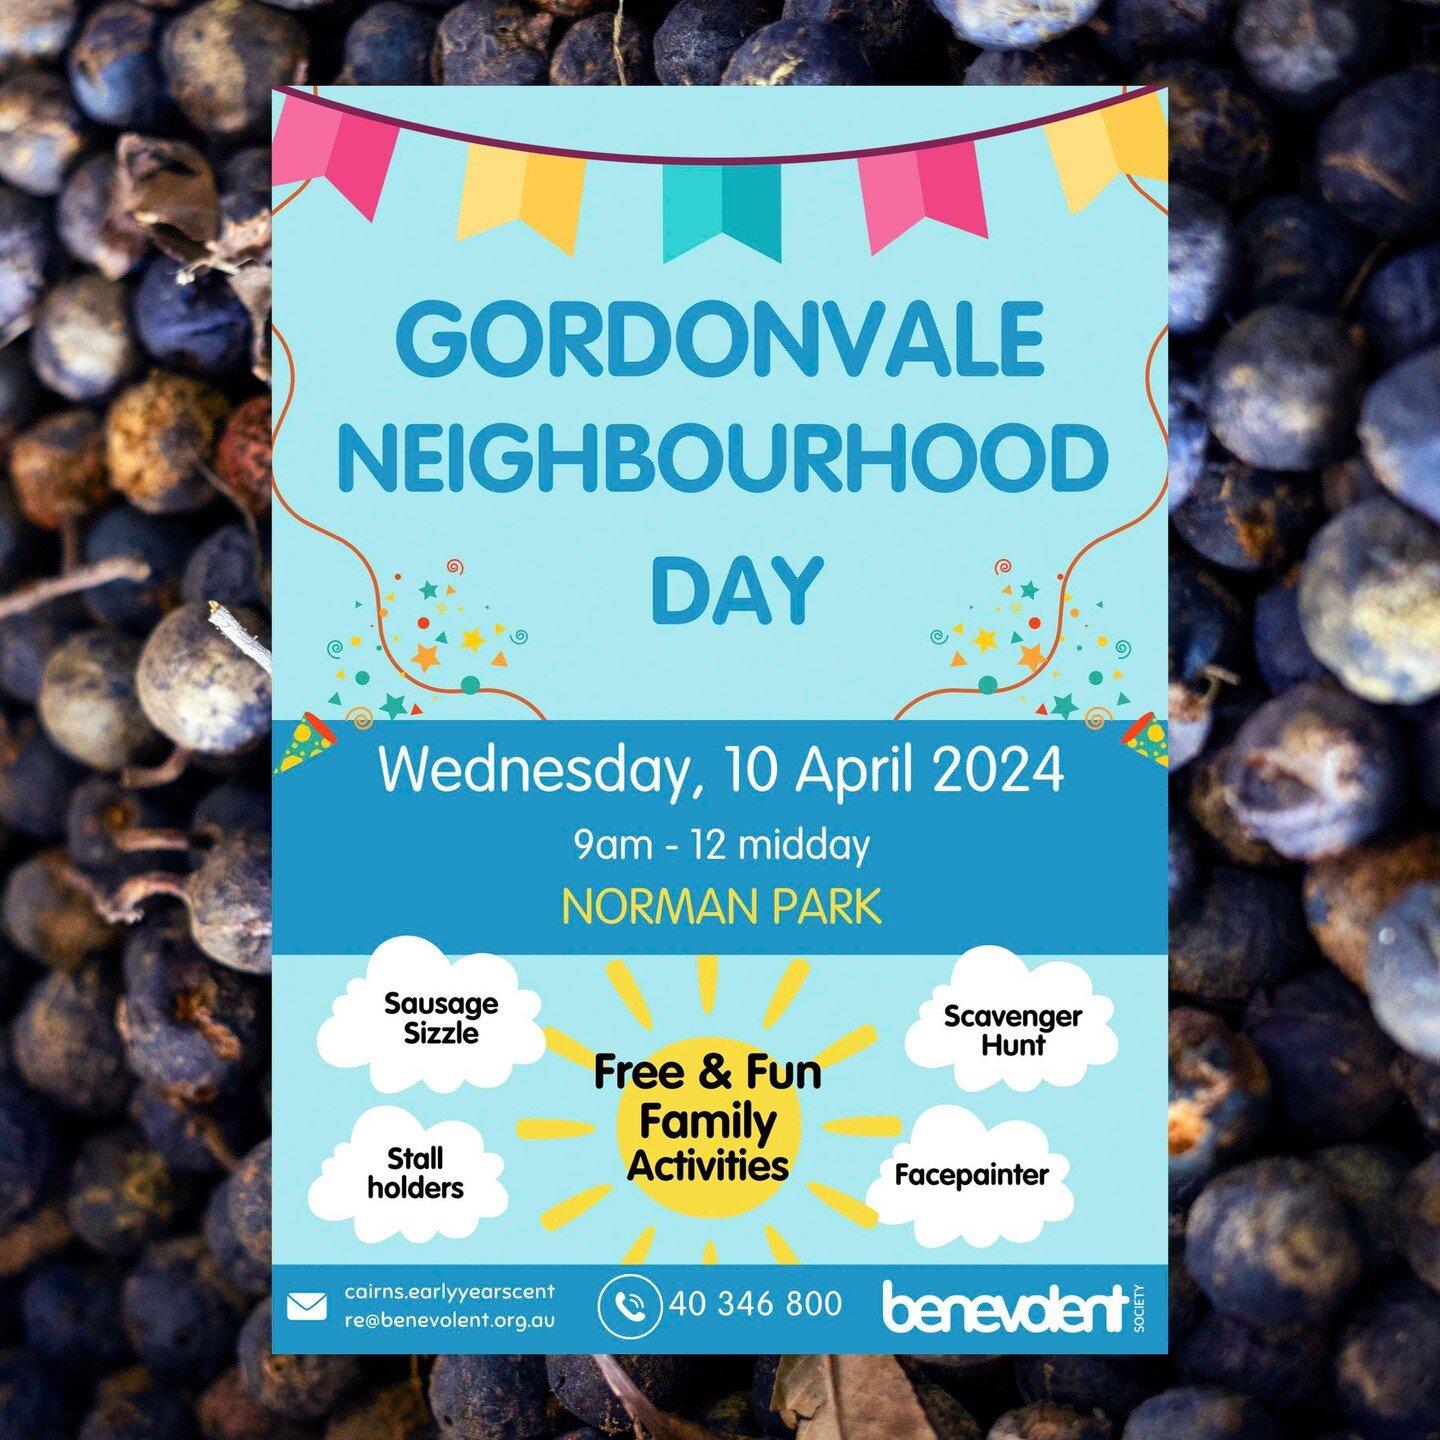 Come and plant native seeds with us at our Landcare information stall at the upcoming Gordonvale Neighbourhood Day, next Wednesday the 10th of April. We will be there from 9am - 12 midday, at Norman Park. This is a fun free family event with opportun